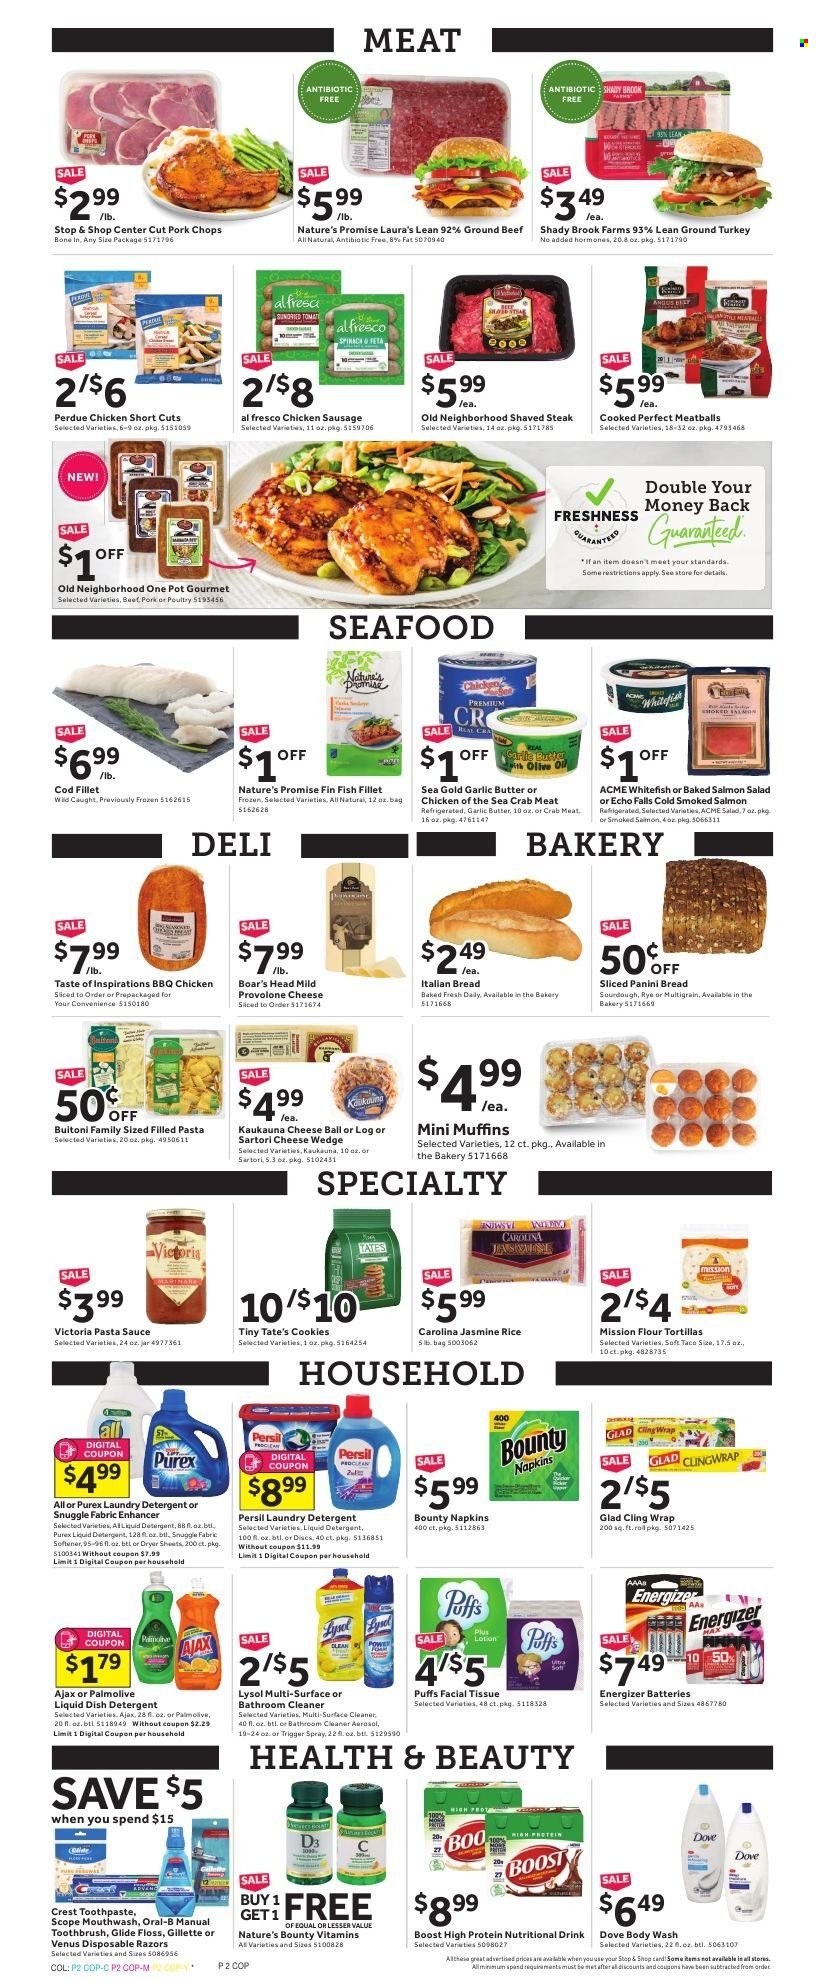 thumbnail - Stop & Shop Flyer - 11/26/2021 - 12/02/2021 - Sales products - bread, tortillas, panini, Nature’s Promise, tacos, flour tortillas, puffs, muffin, pastries, spinach, ground turkey, Perdue®, turkey, beef meat, steak, pork chops, pork meat, cod, crab meat, fish fillets, salmon, smoked salmon, whitefish, crab, fish, pasta sauce, meatballs, sauce, Buitoni, filled pasta, Boar's Head, ready meal, chicken sausage, feta, Provolone, Dove, cookies, Chicken of the Sea, rice, jasmine rice, Boost, napkins, tissues, detergent, surface cleaner, cleaner, all purpose cleaner, Lysol, Ajax, bathroom cleaner, Snuggle, Persil, fabric softener, liquid detergent, laundry detergent, dryer sheets, Purex, dishwashing liquid, body wash, Palmolive, toothbrush, Oral-B, toothpaste, mouthwash, Crest, facial tissues, Gillette, Venus, disposable razor, clingwrap, battery, Energizer, pot, Nature's Bounty, vitamin D3, dietary supplement, vitamins. Page 2.